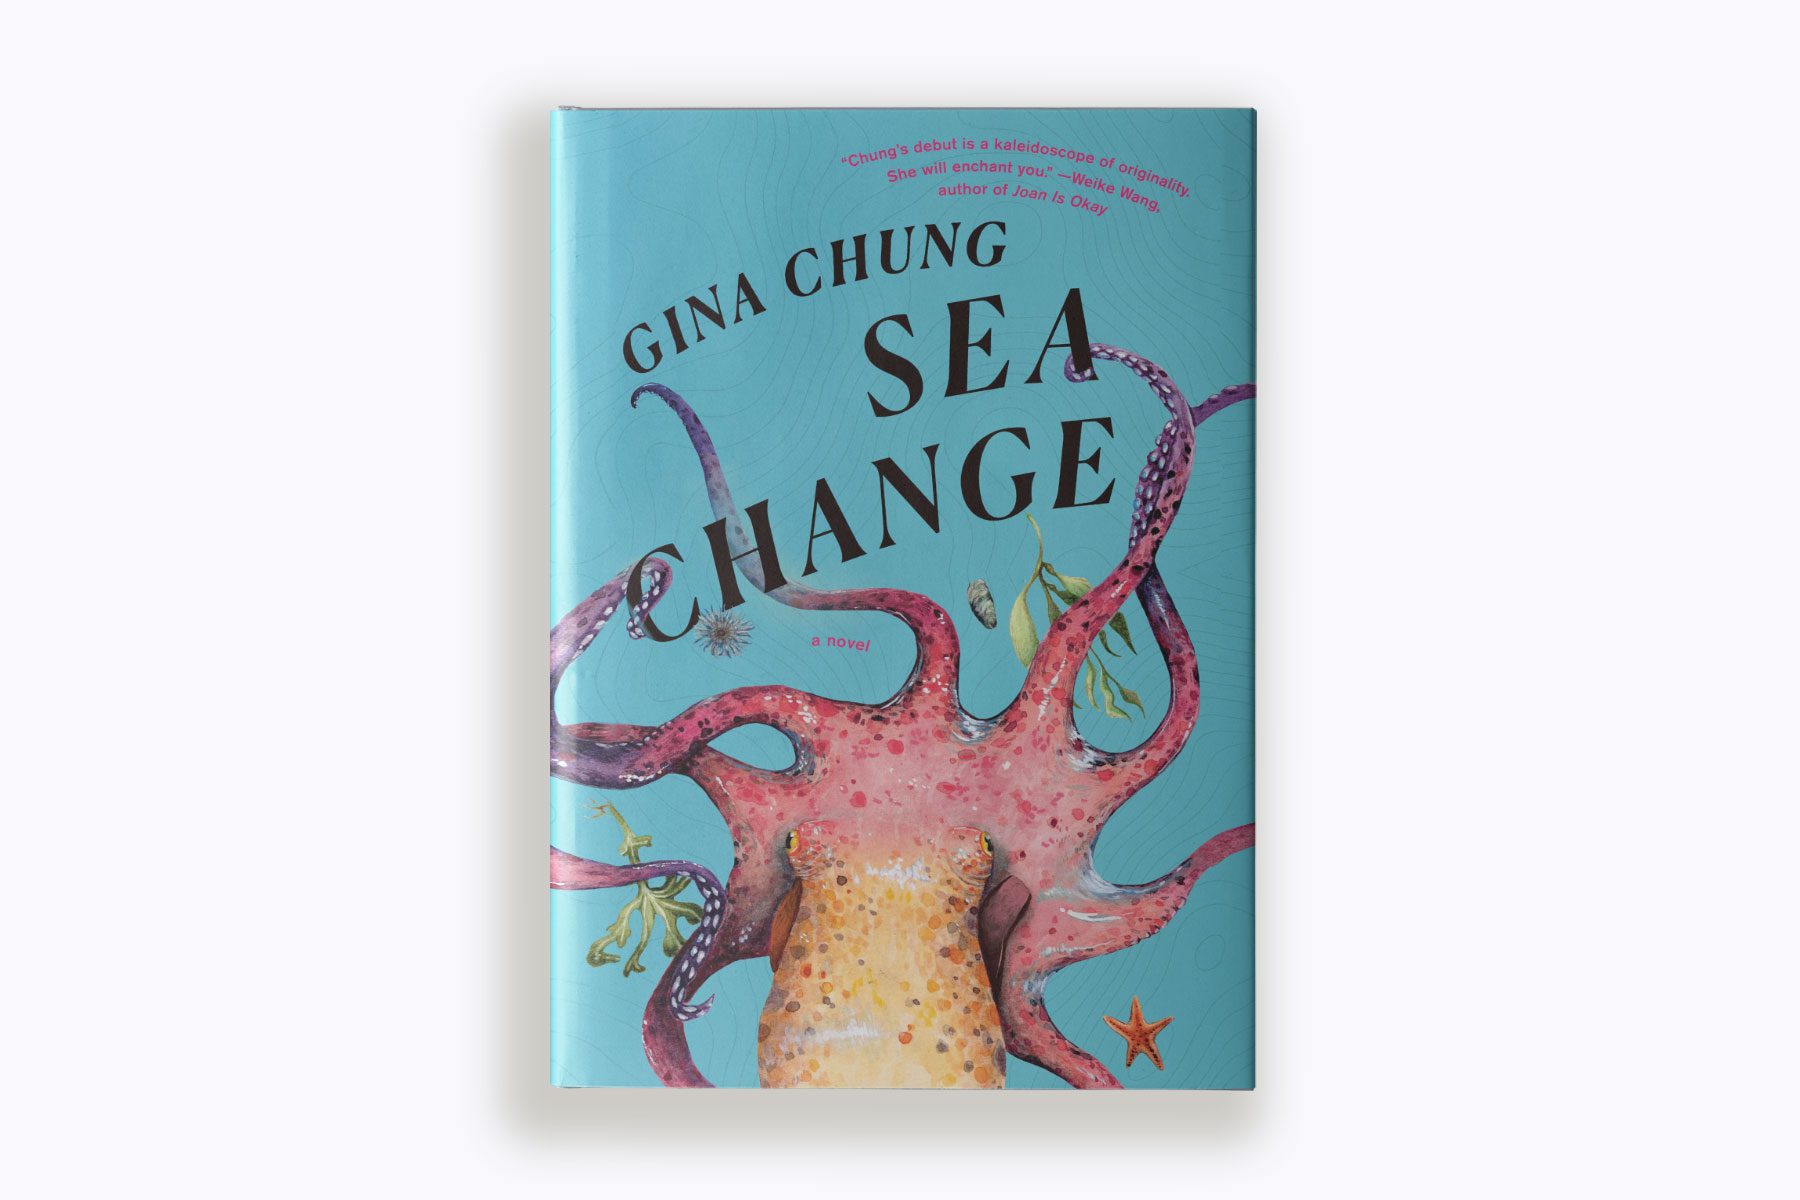 A photo illustration of Gina Chung's "Sea Change" book cover.